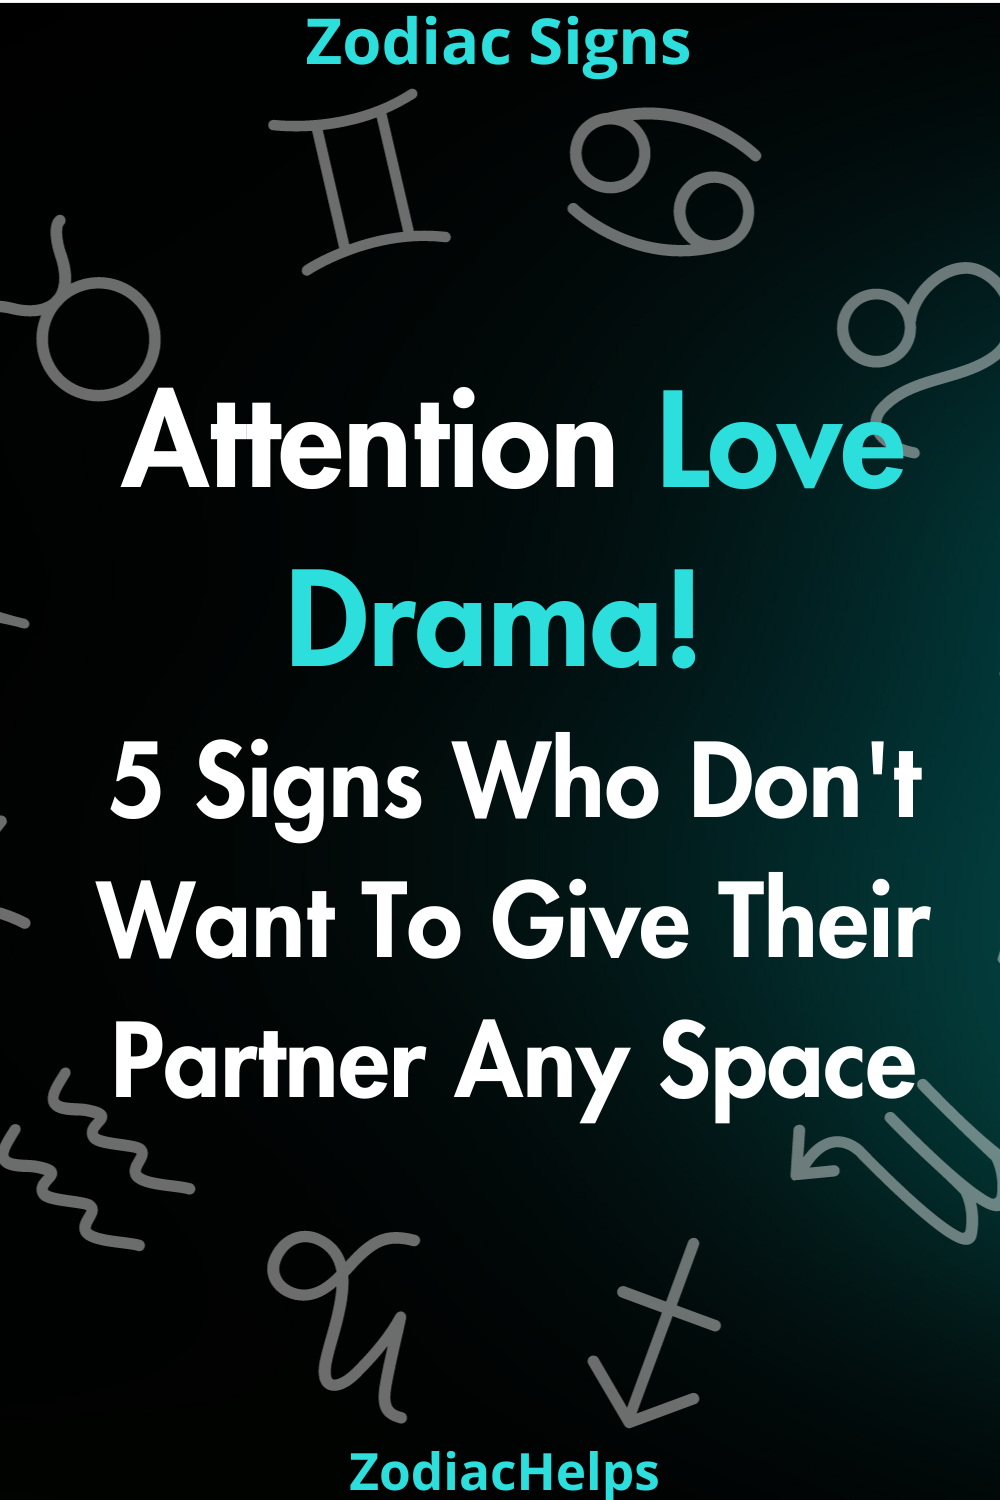 Attention Love Drama! 5 Signs Who Don't Want To Give Their Partner Any Space